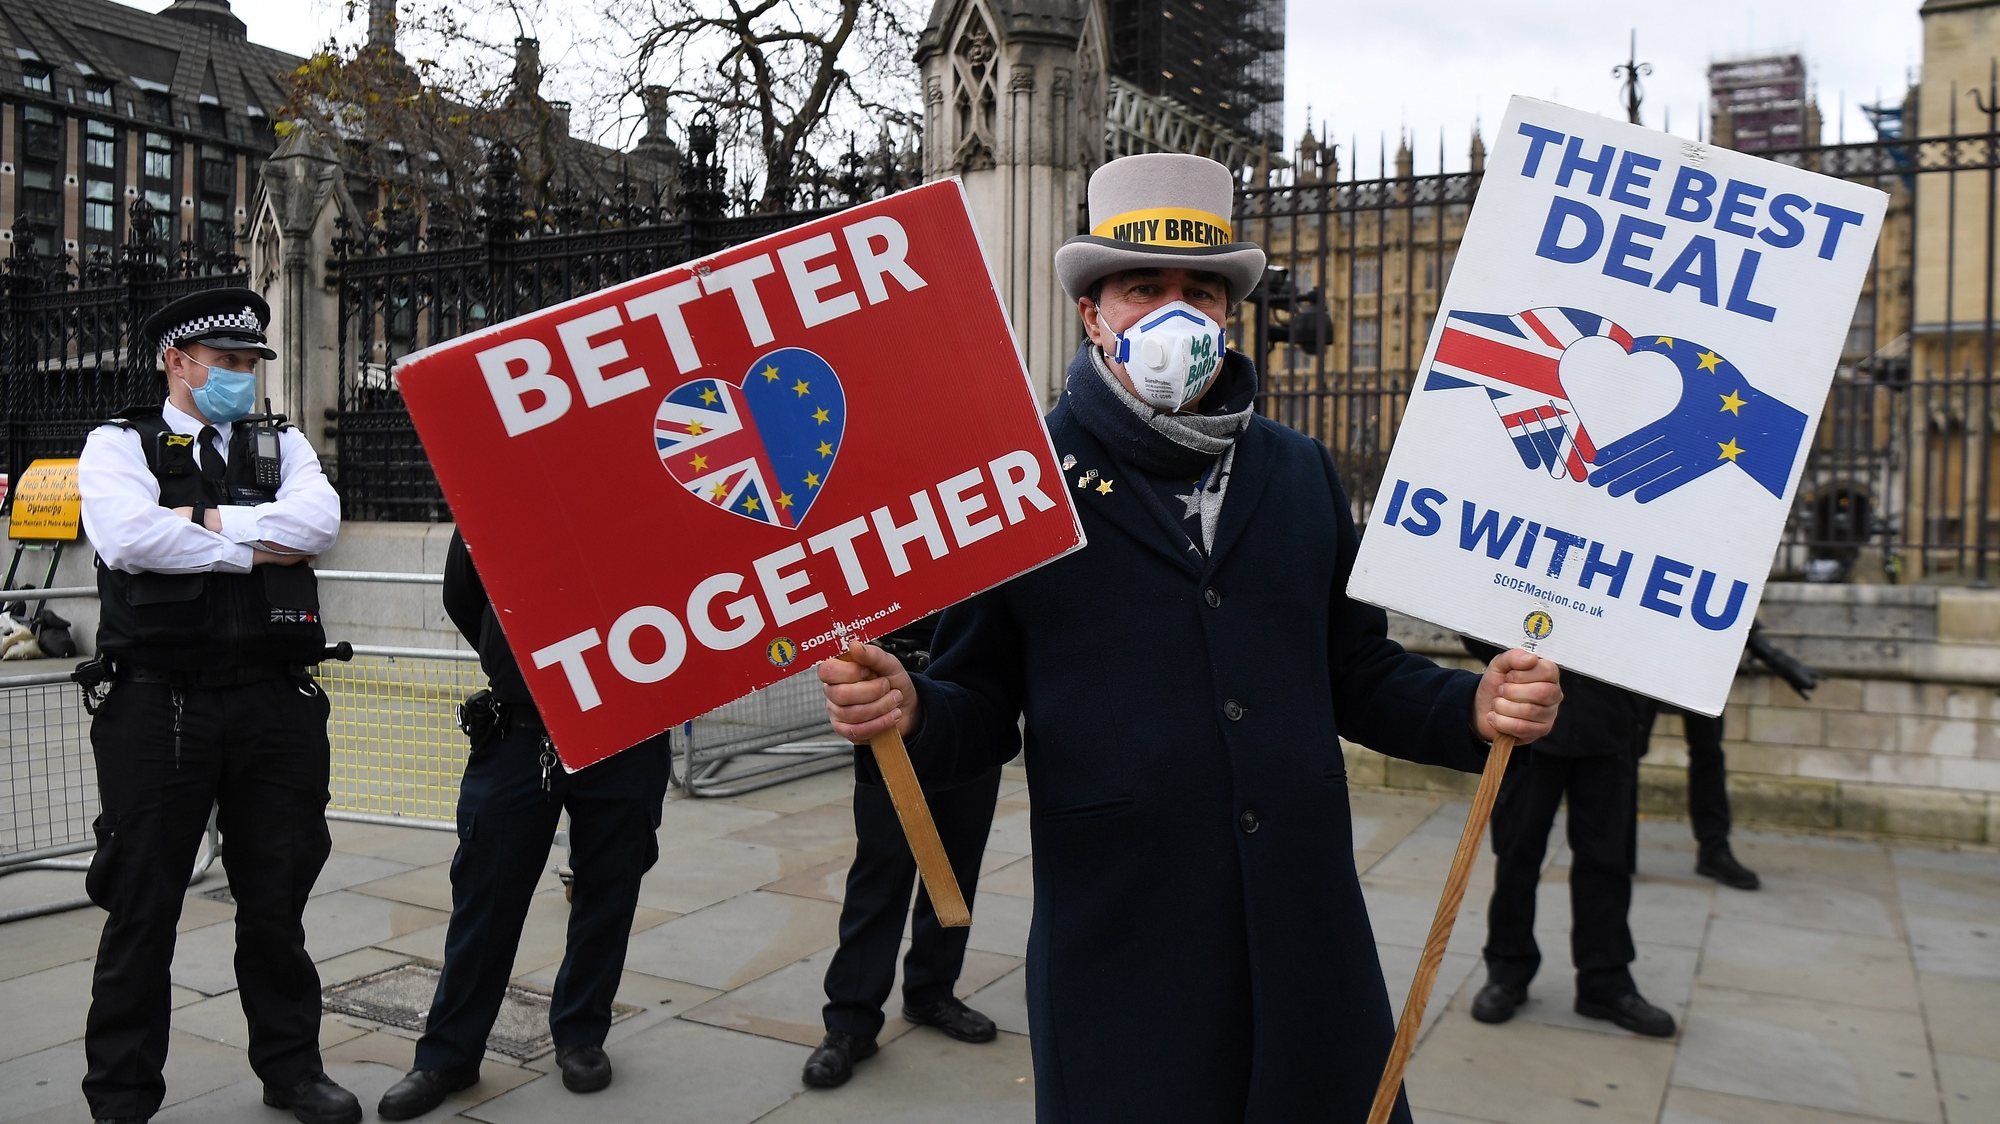 epa08813272 A pro EU demonstrator protests outside parliament during Brexit talks in London, Britain, 11 November 2020. Brexit negotiations are continuing in London ahead of a looming deadline.  EPA/ANDY RAIN